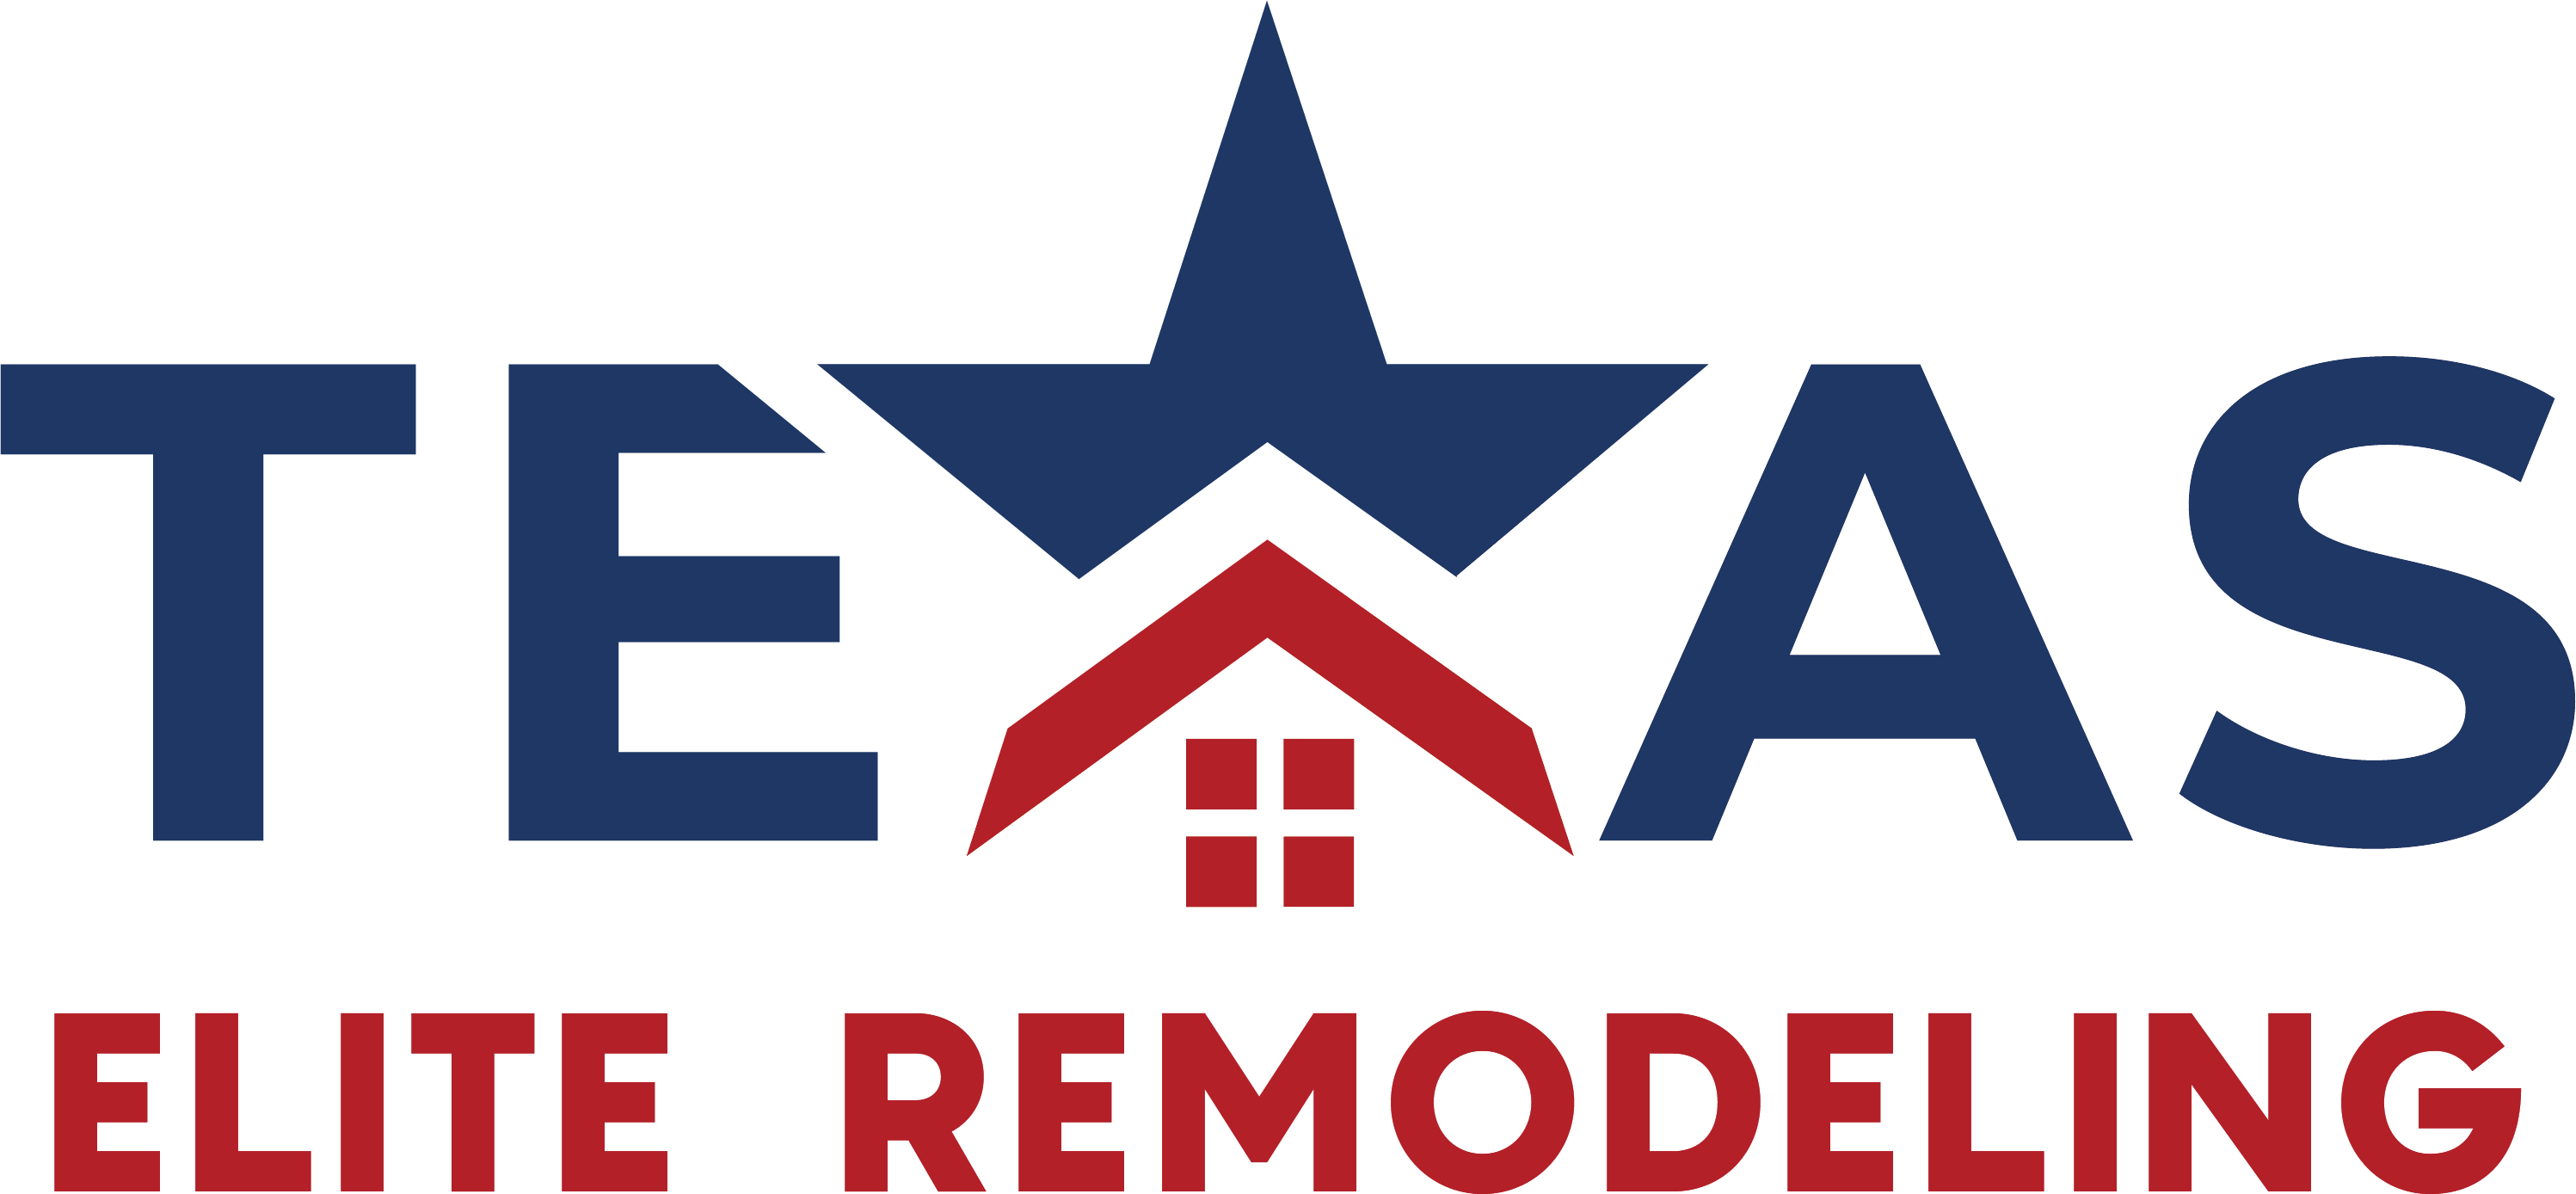 bathroom remodeling rockwall tx heath fate royse city best companies services near me texas elite remodeling